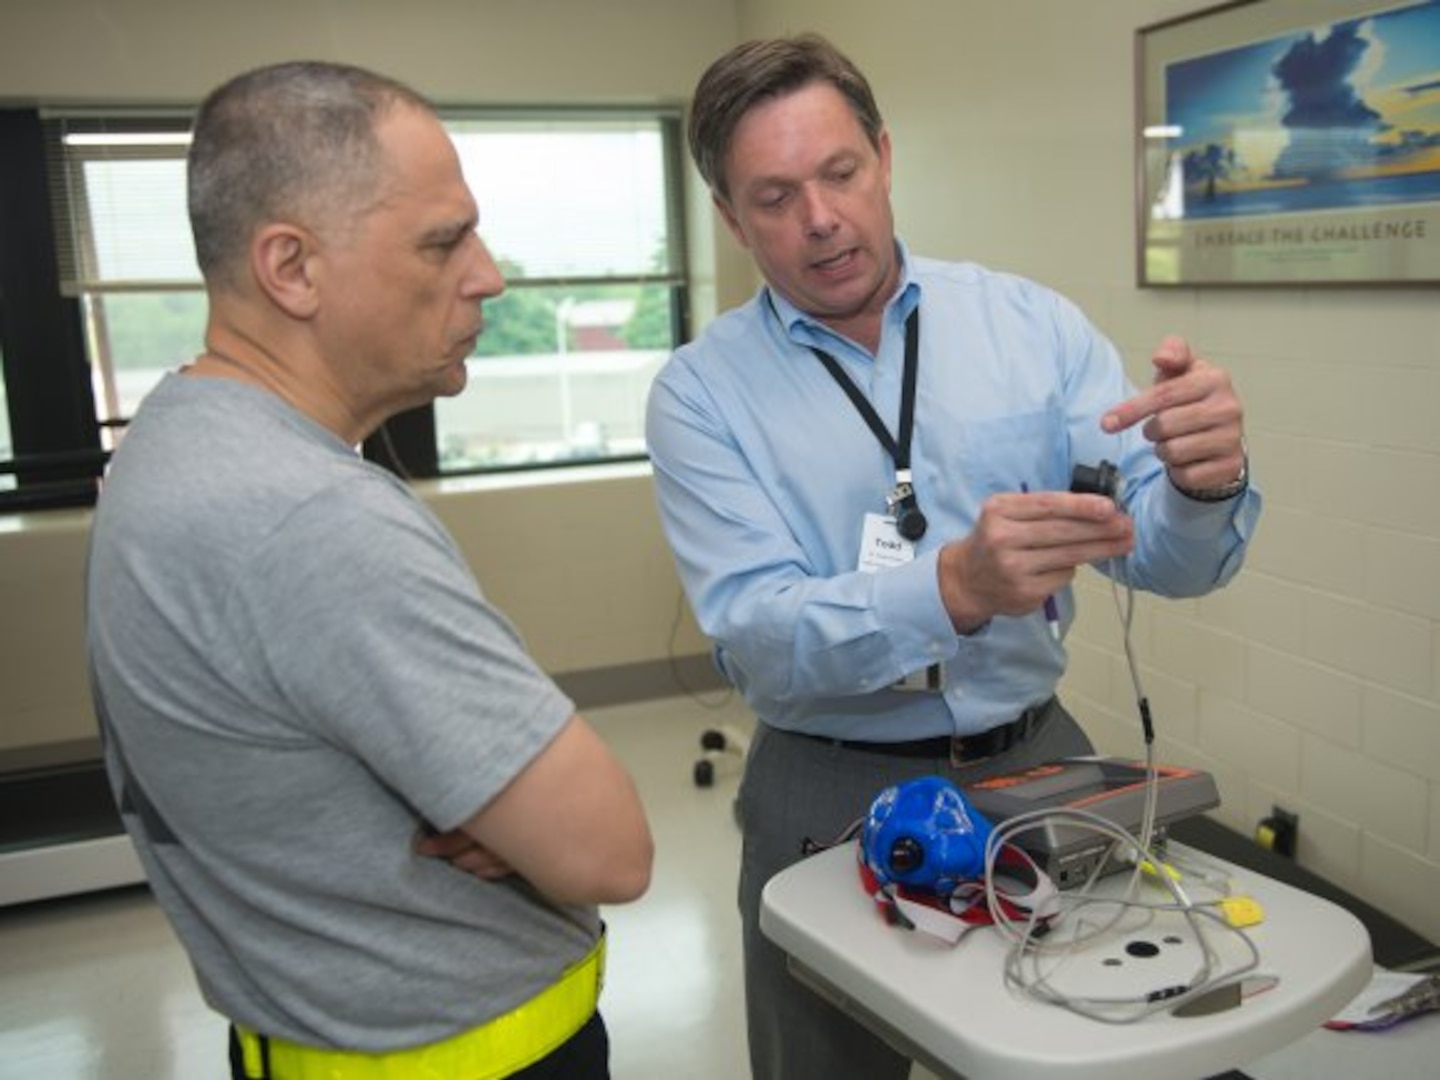 Todd Hoover, the Army’s Wellness Center Operations program manager, explains how metabolic testing equipment measures the amount of oxygen an individual uses to sustain normal functions at an Aberdeen Proving Ground center in Maryland. Hoover was invited to speak to DLA Troop Support employees as part of the organization’s efforts to develop workforce resiliency.